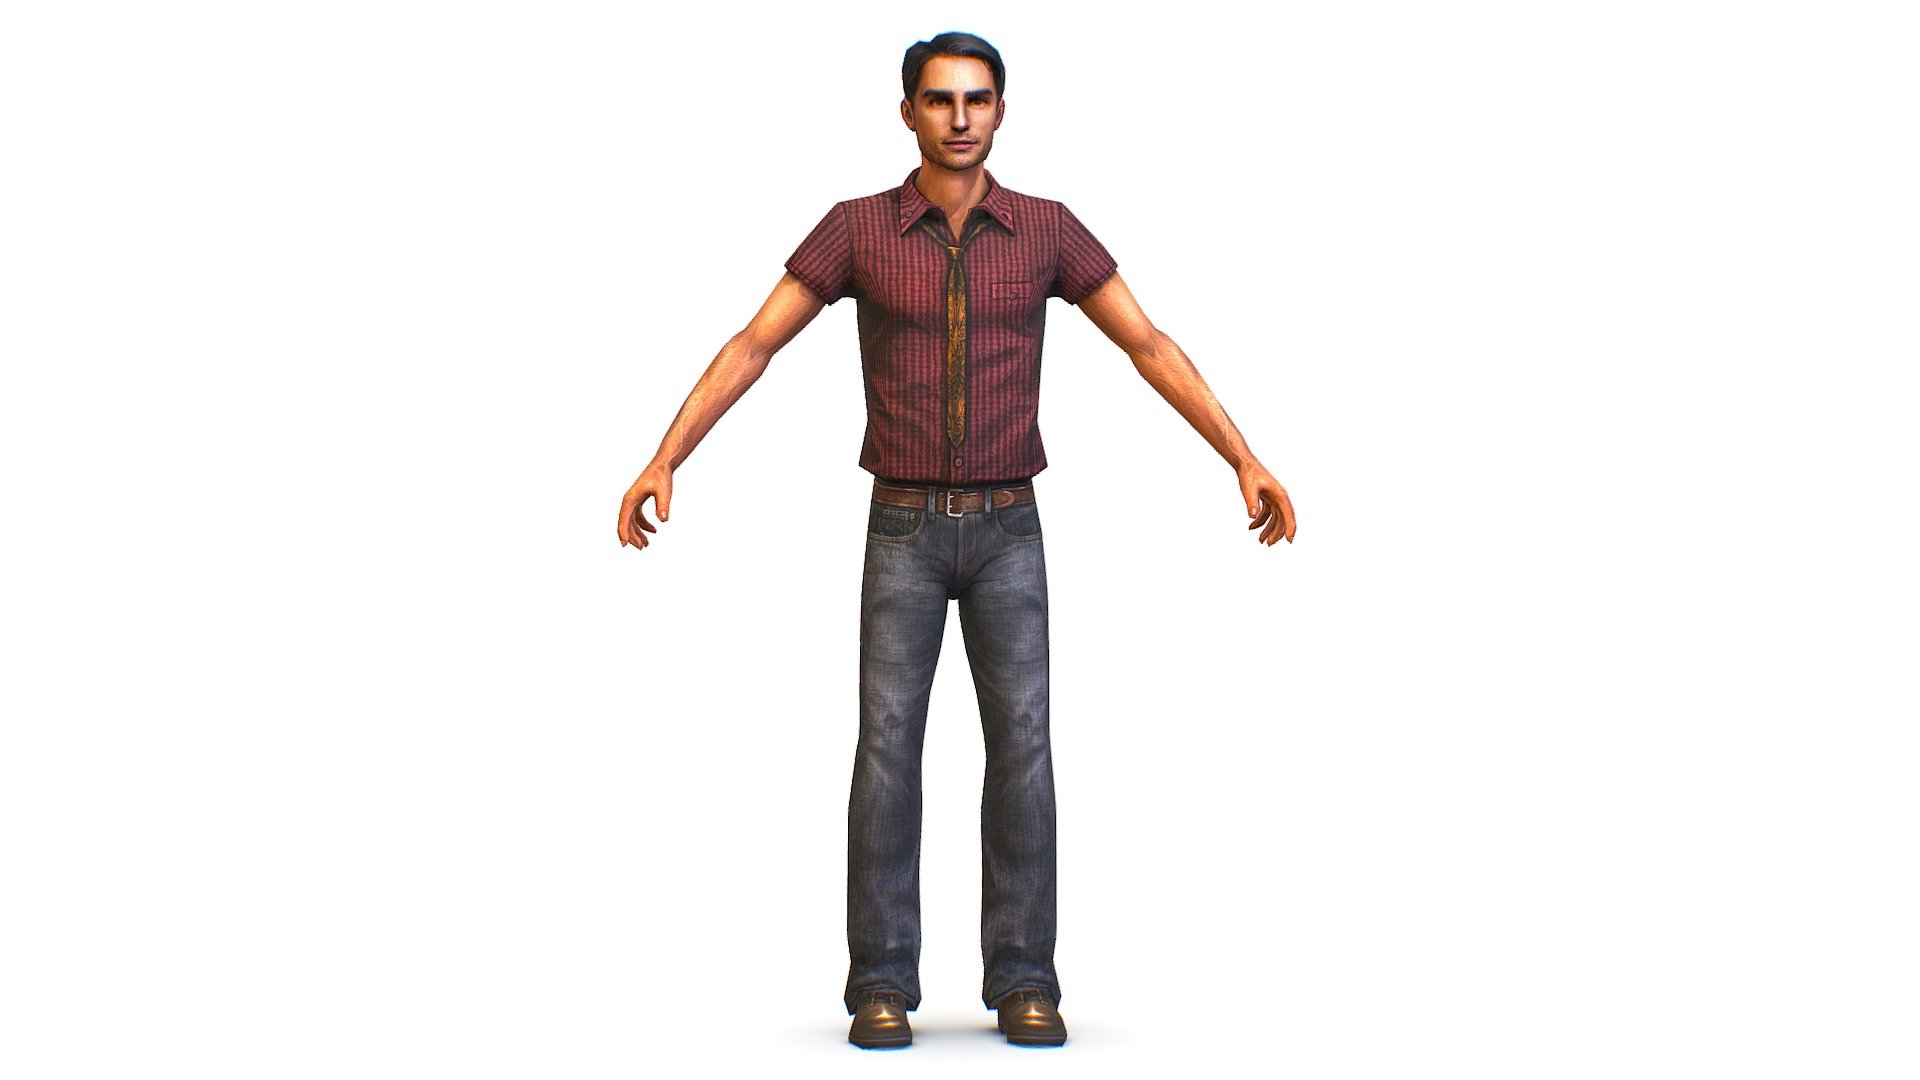 a young man in jeans and a red shirt - 3dsMax file included/ texture 1024 color only 3d model